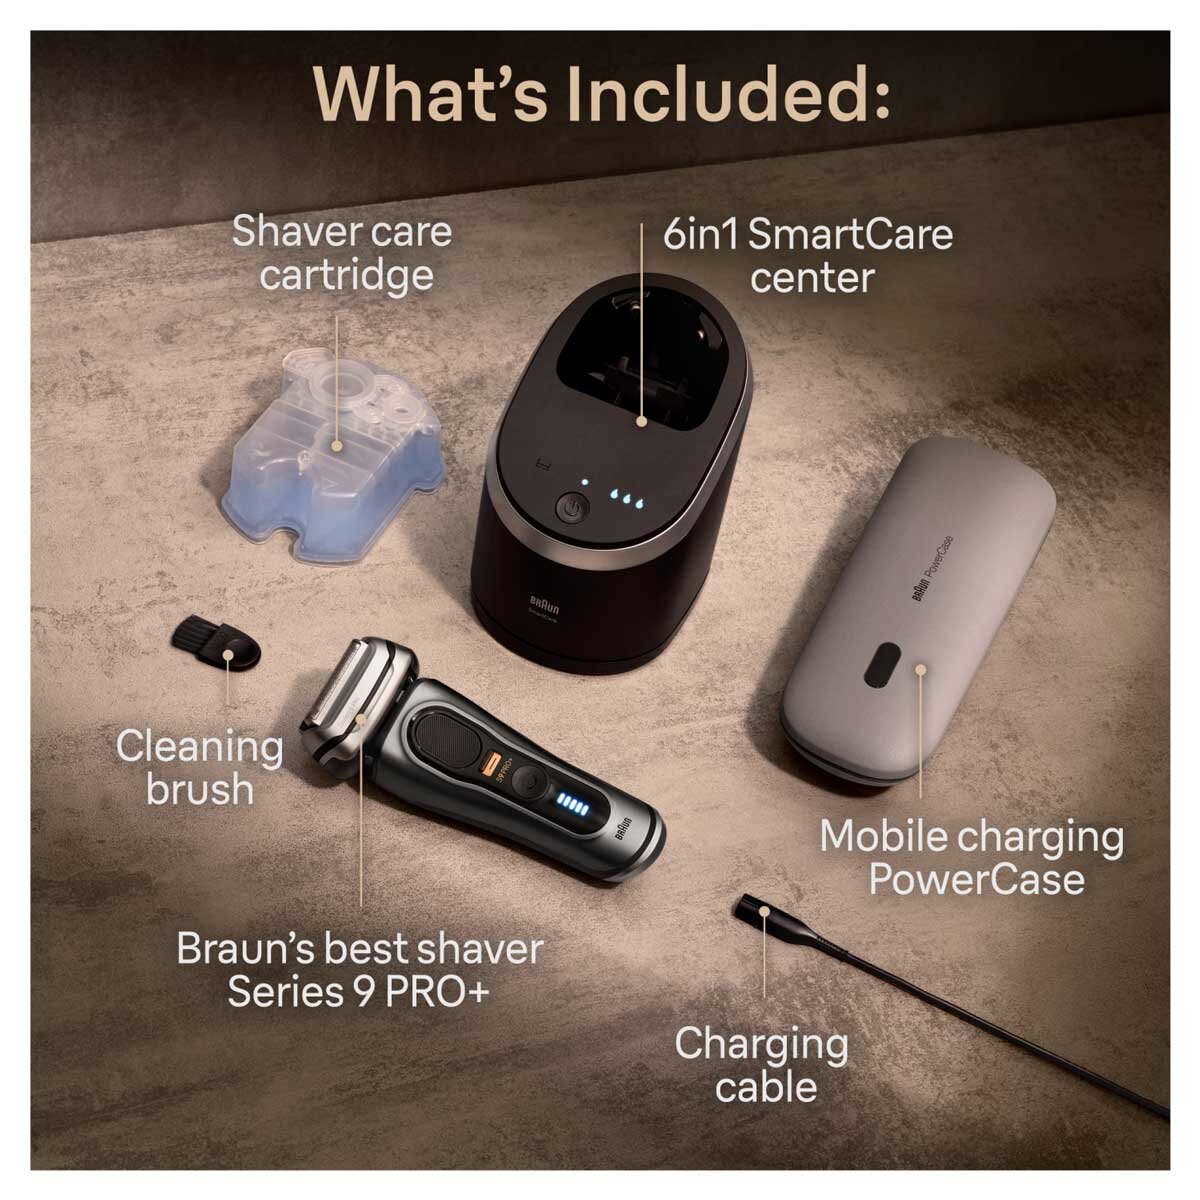 Image of Braun shaver and accessories